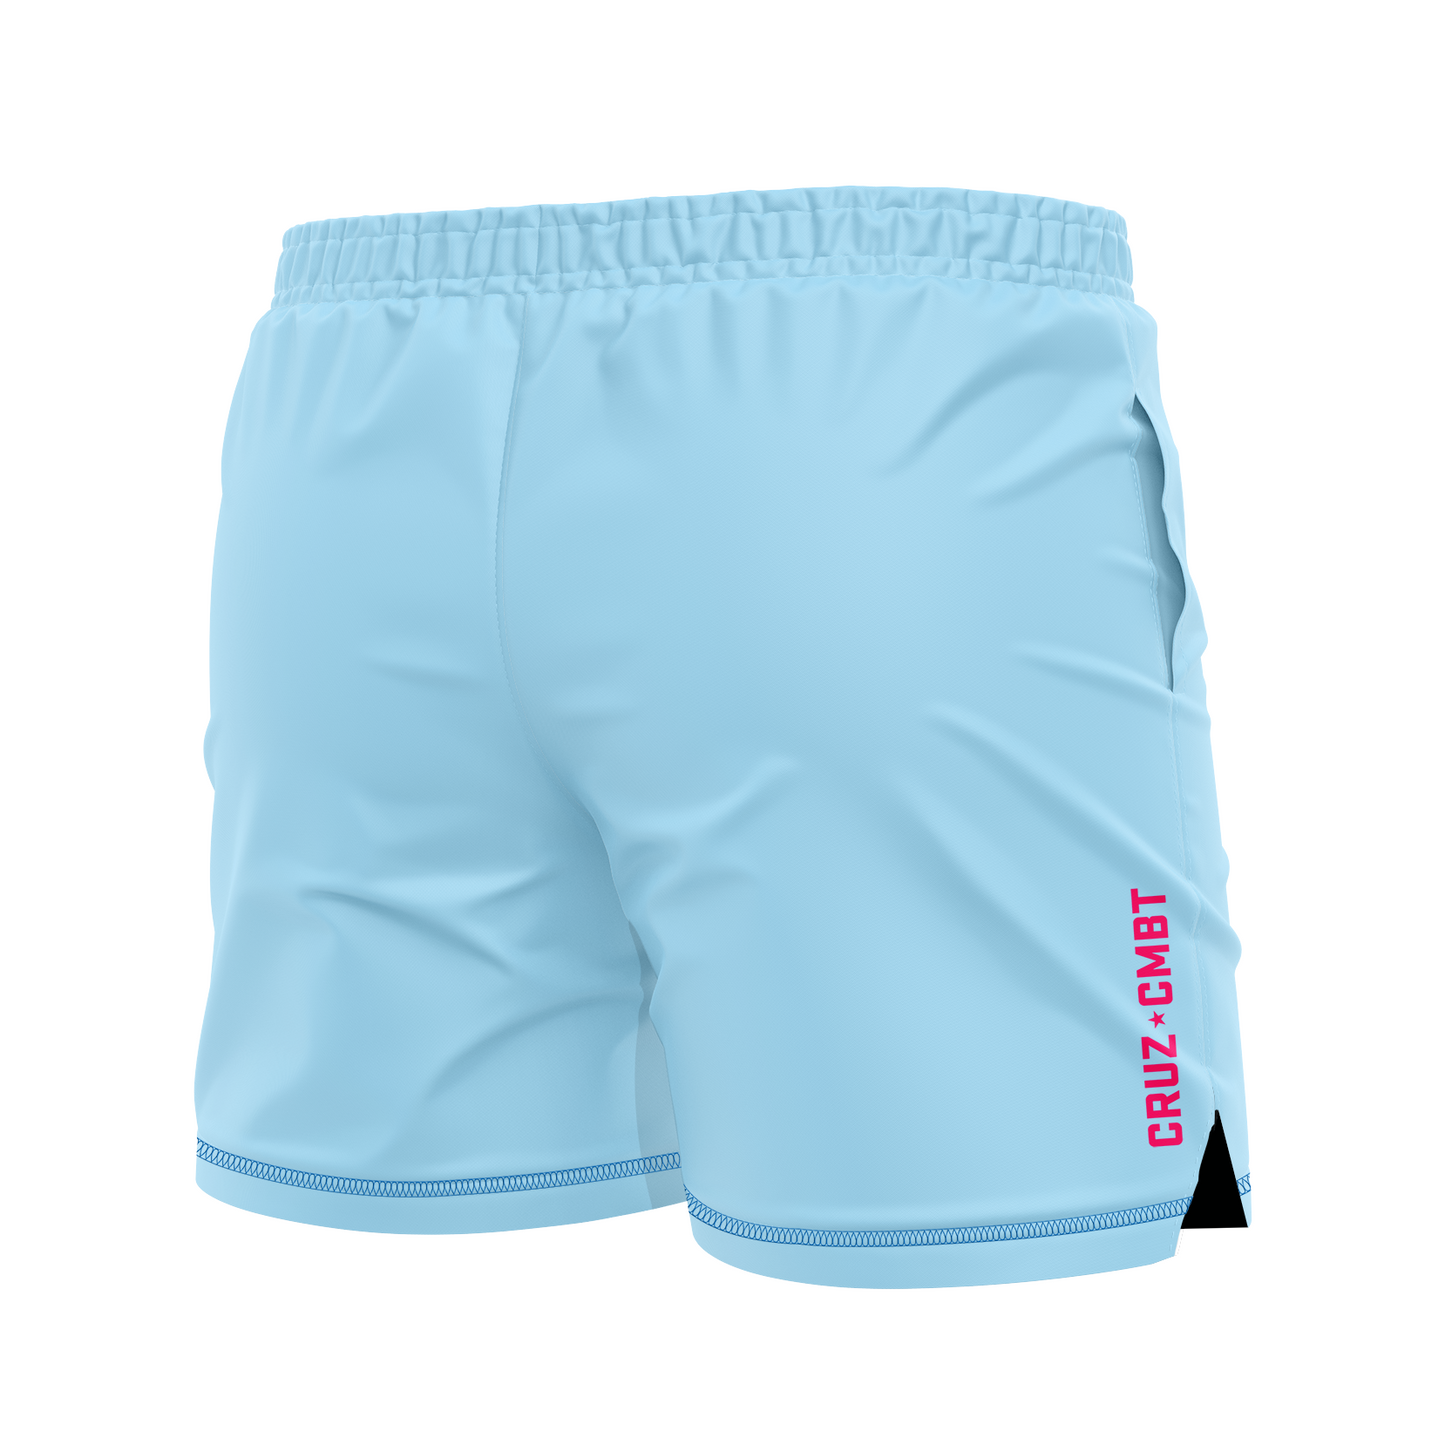 Base Collection men's FC shorts, light blue and pink